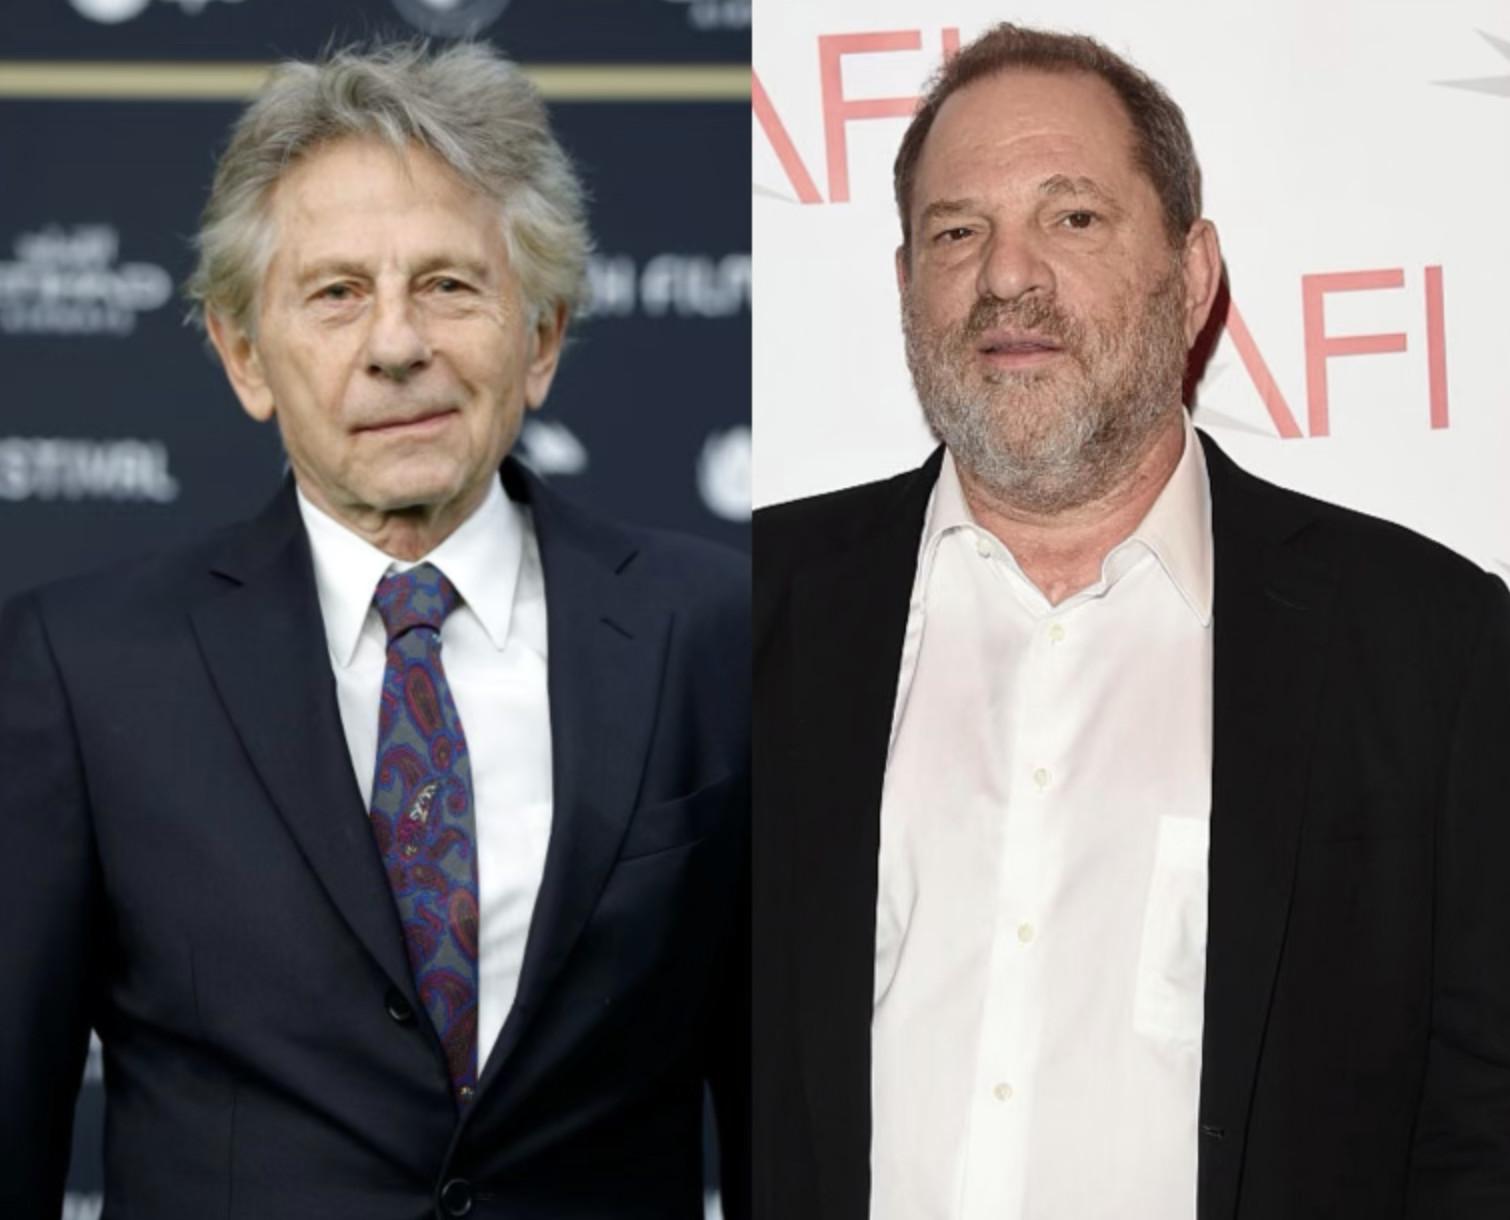 The Academy Critcized Over Roman Polanski, Harvey Weinstein & Others After Will Smith Ban